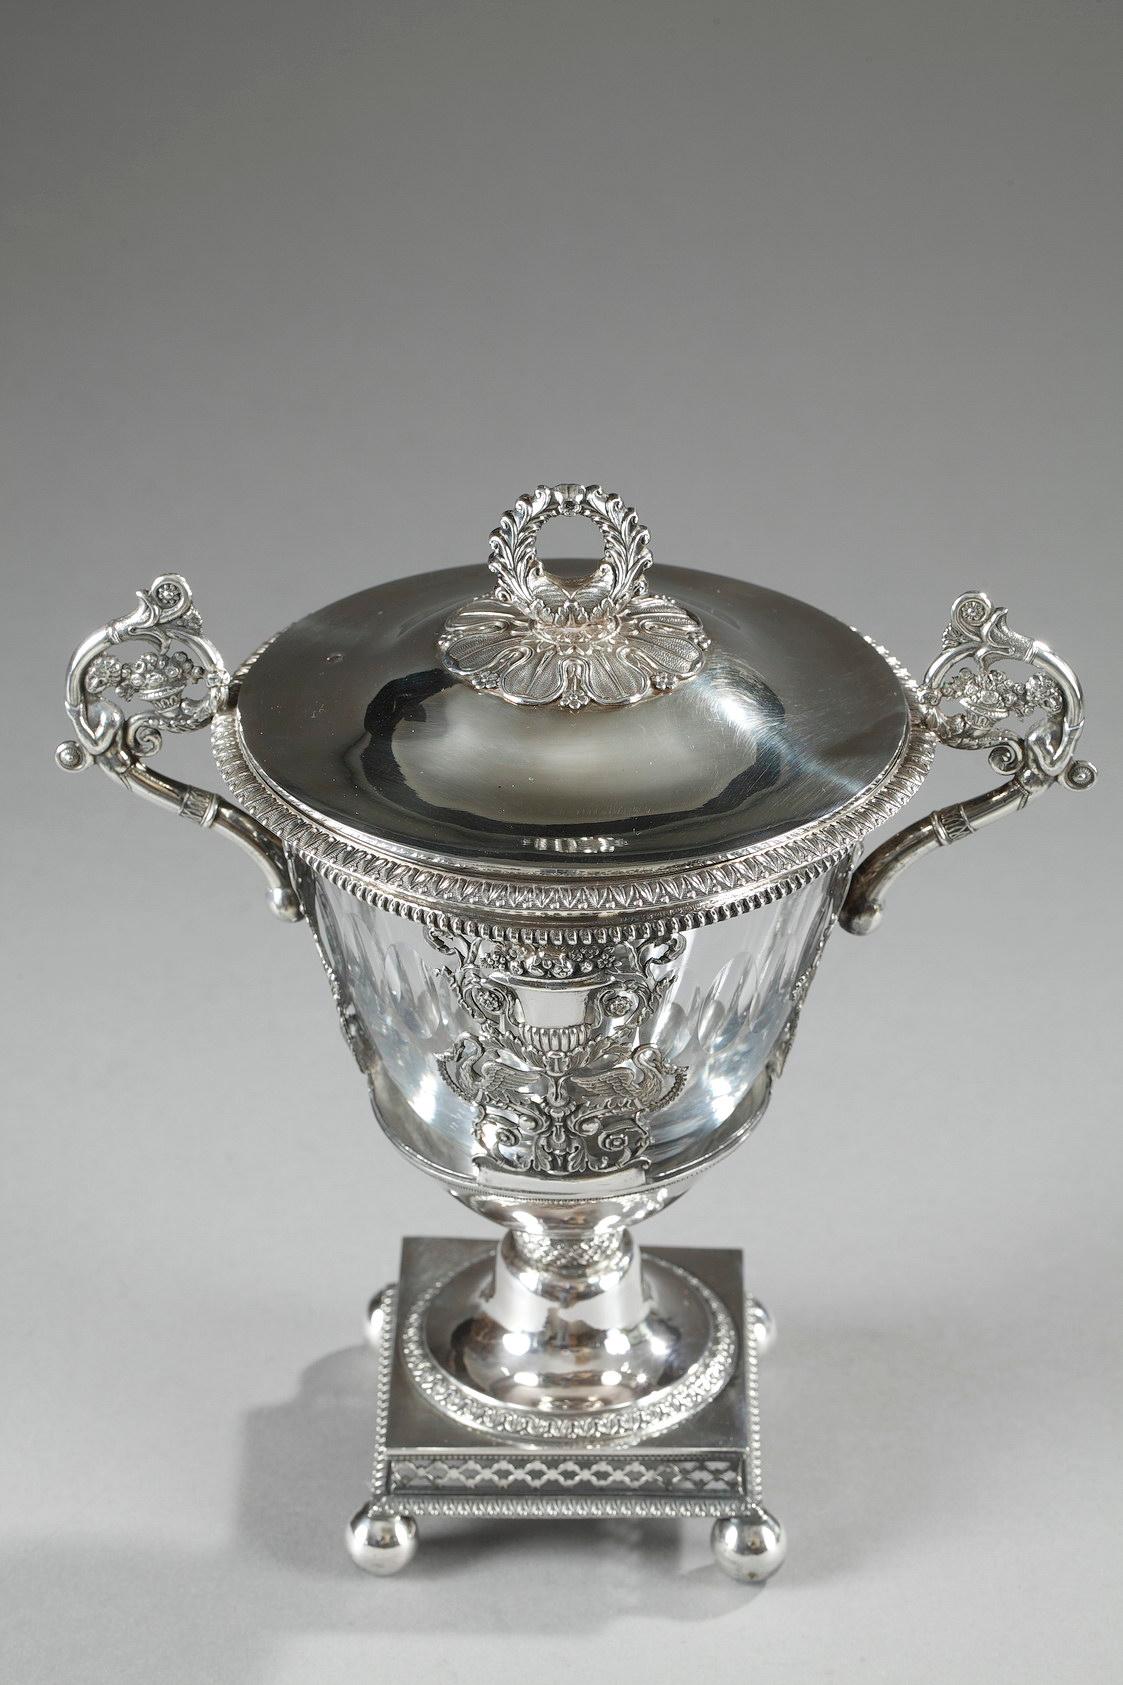 Lightly tapered candy dish in silver and crystal. The rim is ornamented with an openwork geometric frieze, and the paunch features a sculpted silver balustrade vase and two birds standing facing each other on either side of the vase. The birds are